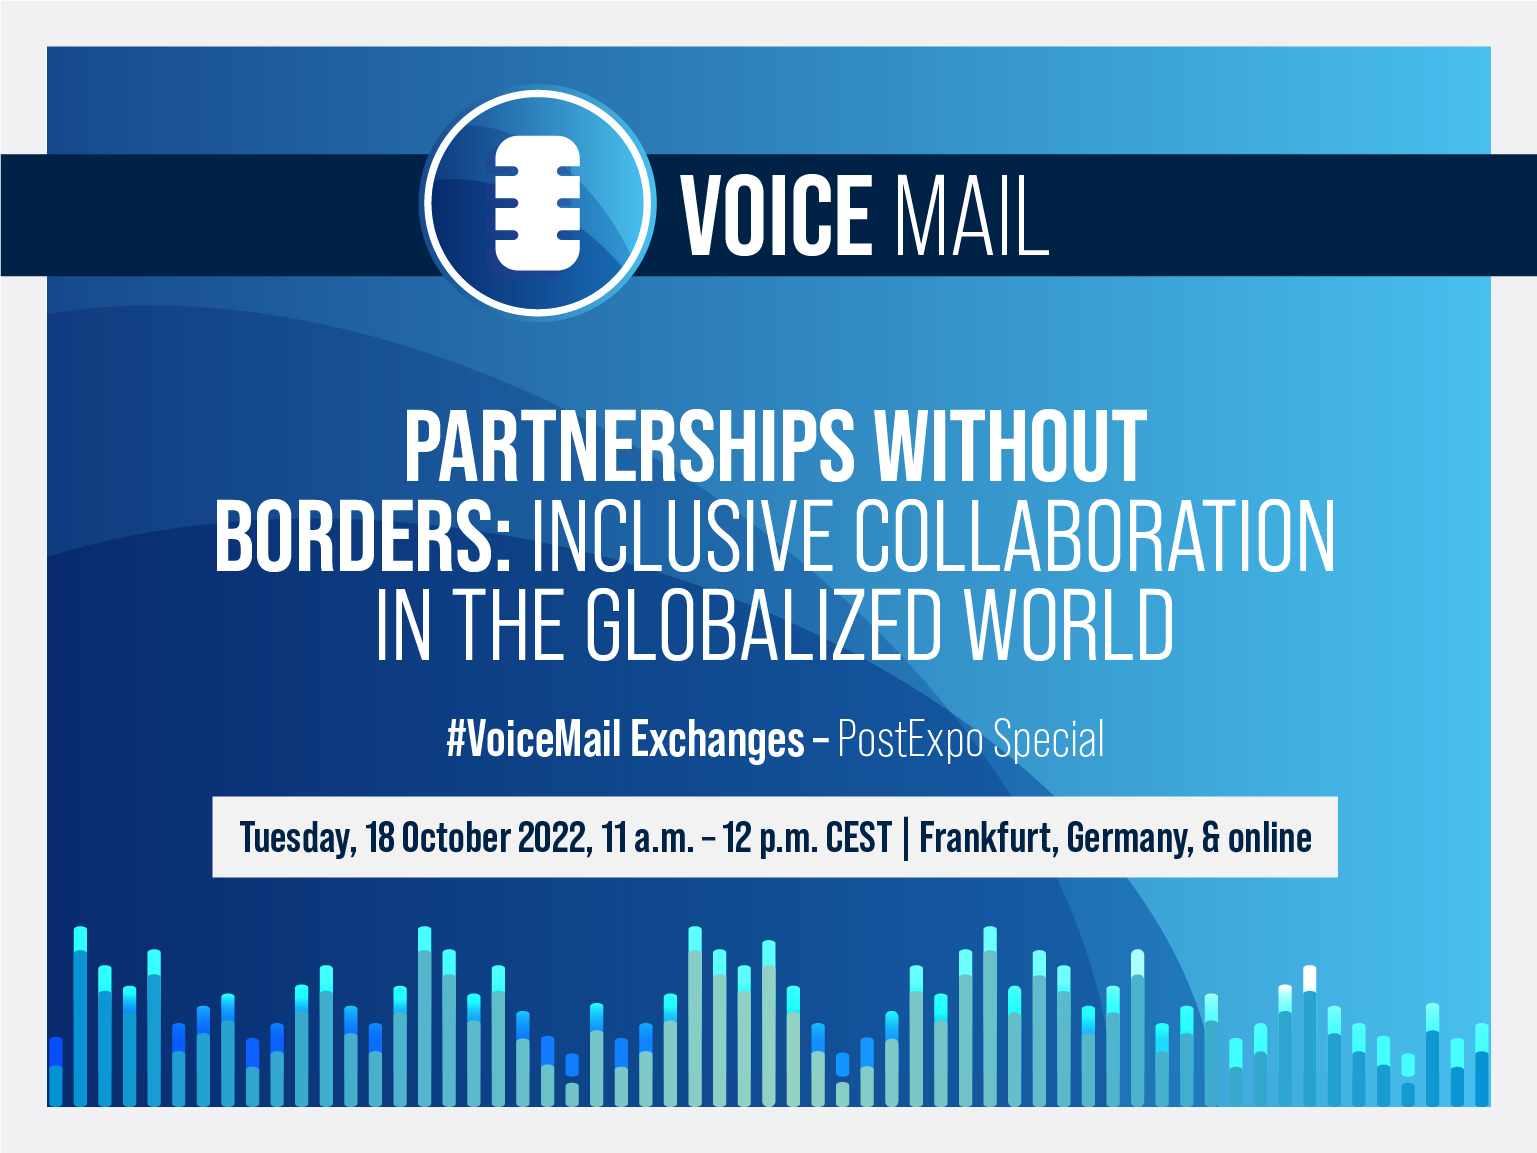 Partnerships without borders: Inclusive collaboration in the globalized world